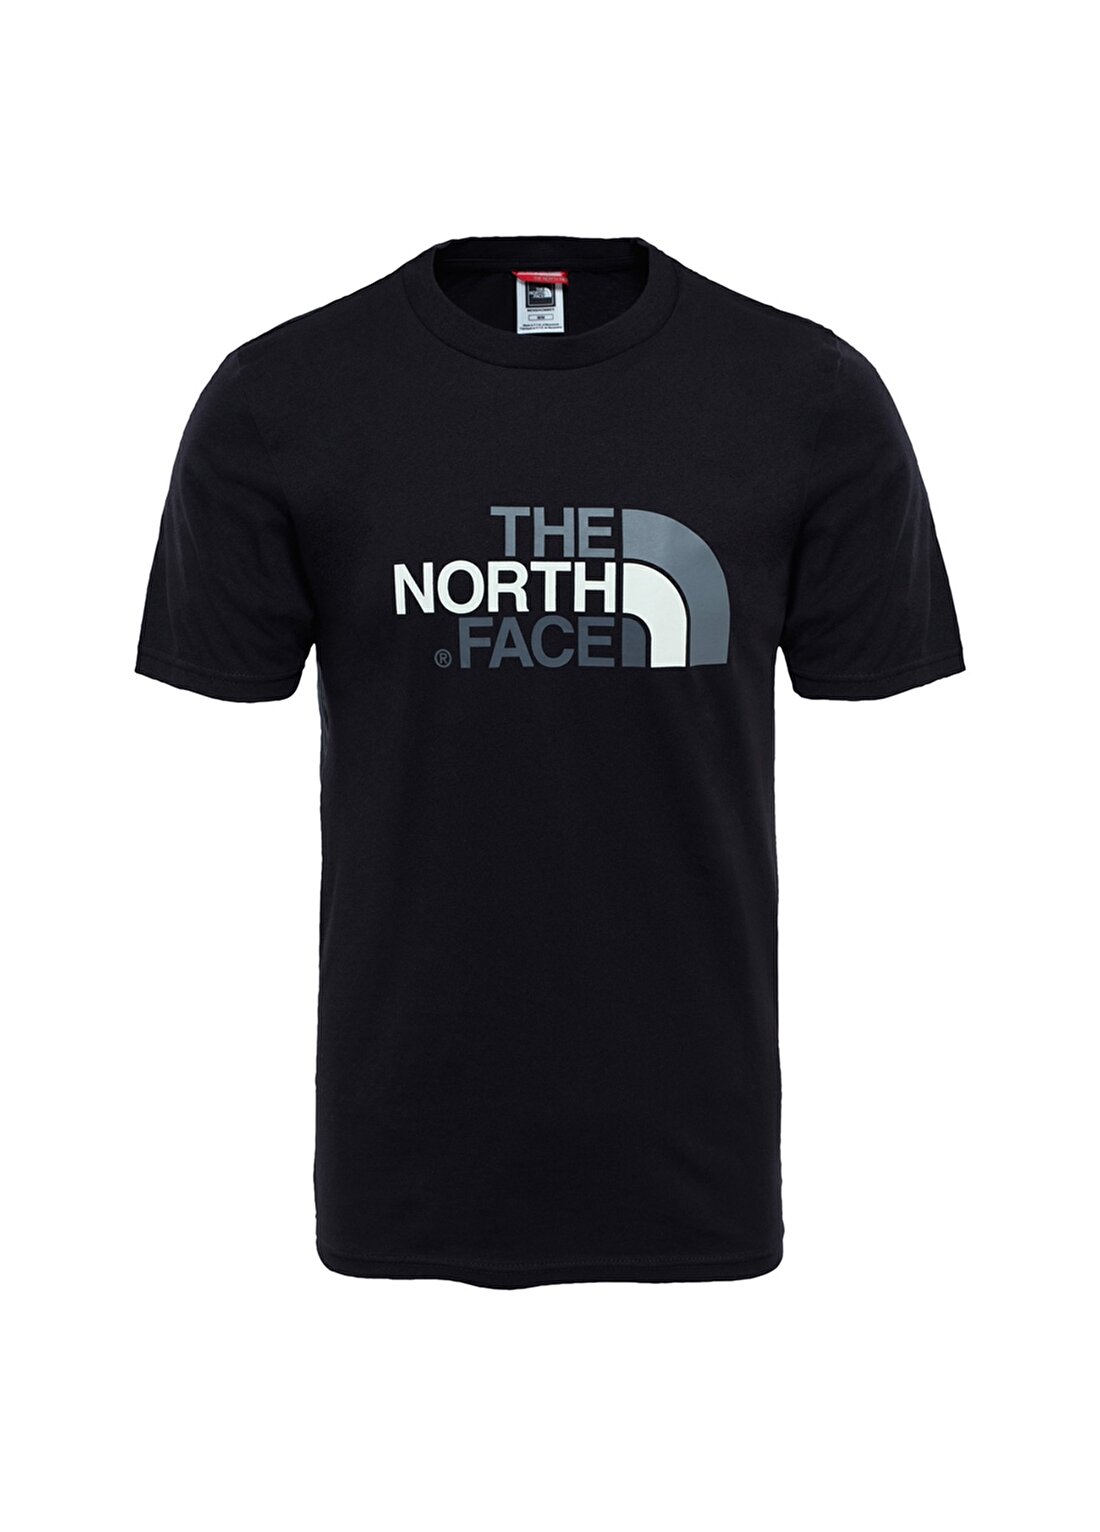 The North Face NF0A2TX3JK31 M S/S Easy T-Shirt